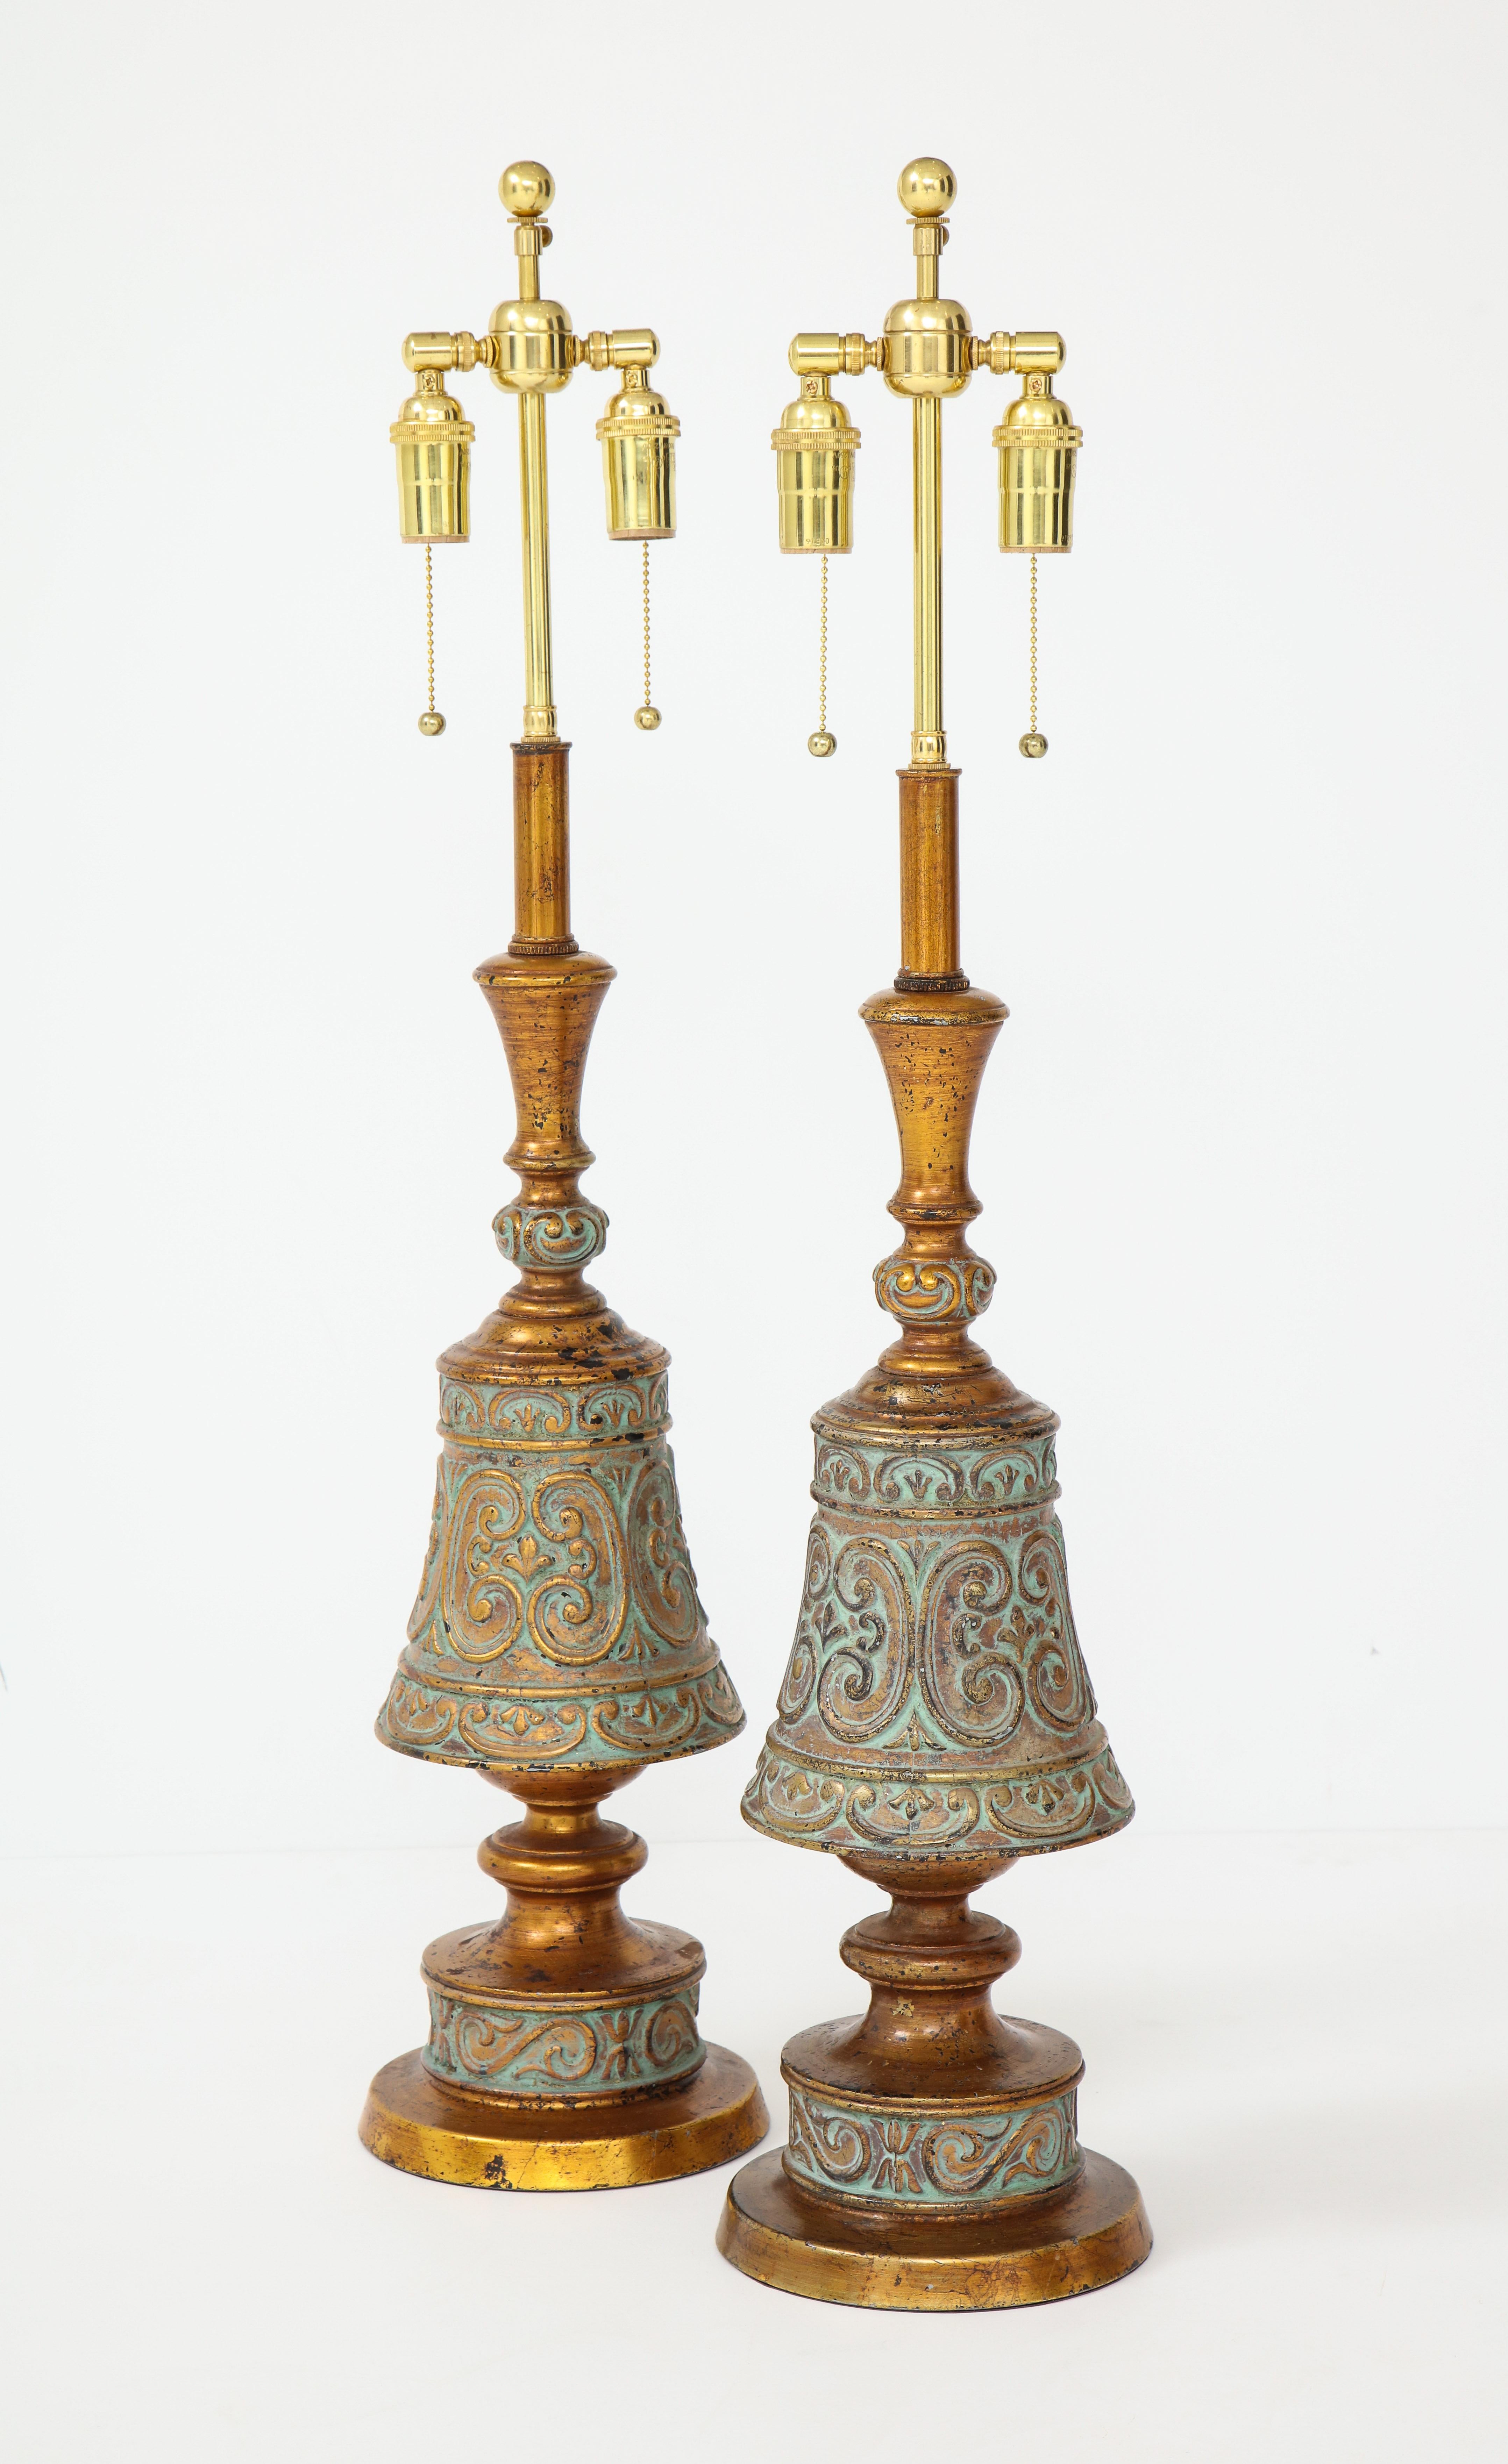 Pair of 1960s Italian Hollywood Regency style lamps.
The beautifully decorated gold and teal metal lamp bodies
have been newly rewired with polished brass double clusters.